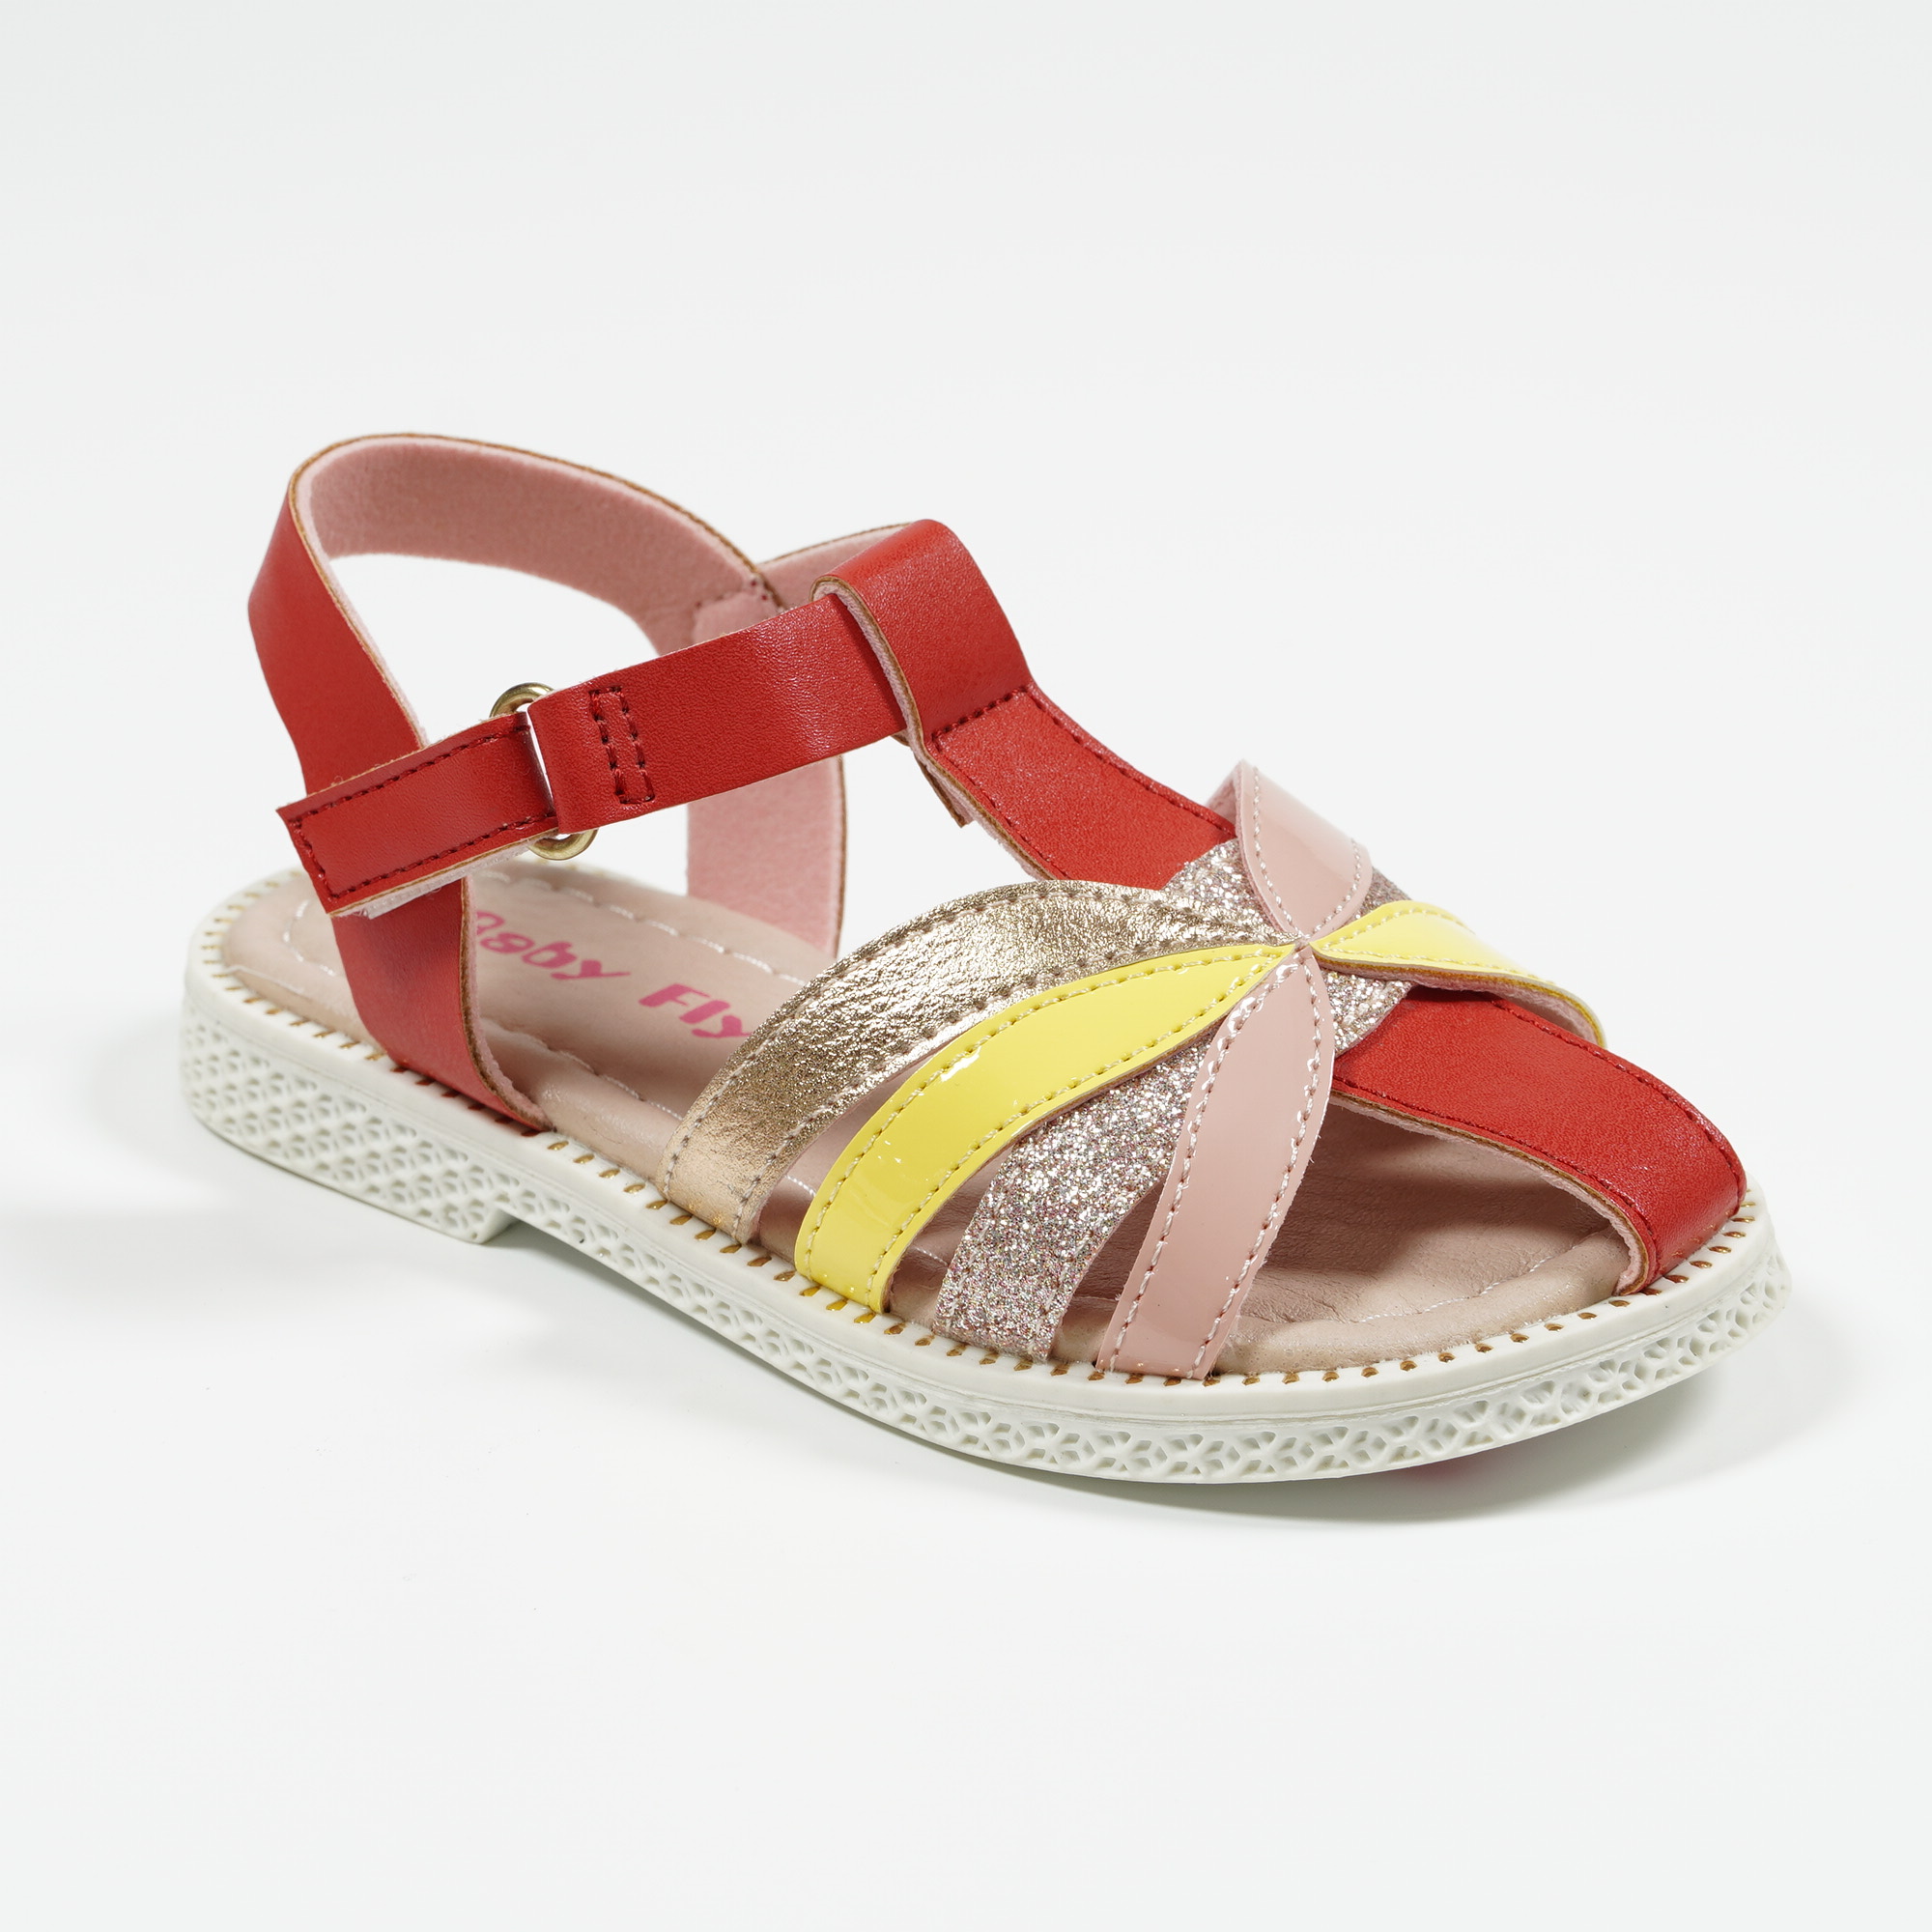 Pretty Caged sandals Nikoofly Closed toe sandals for girls